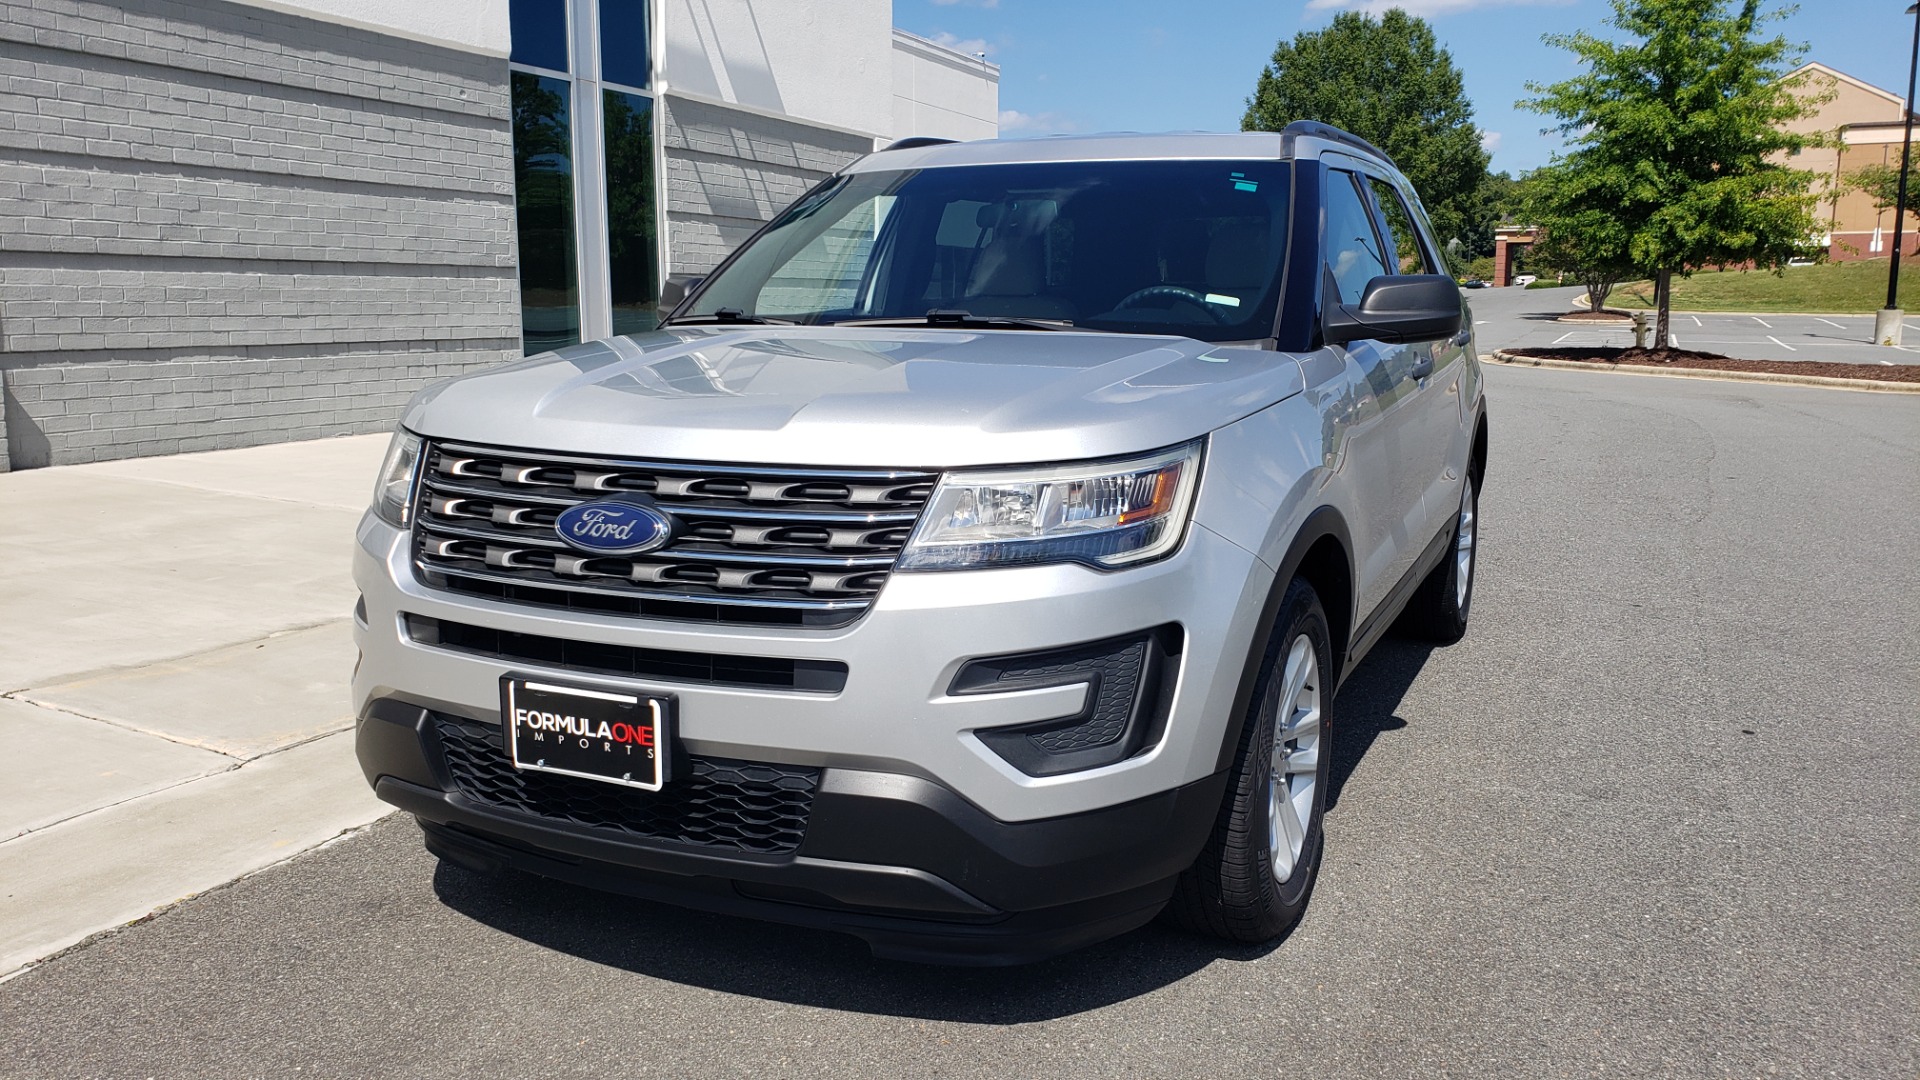 Used 2017 Ford EXPLORER 3.5L V6 / 6-SPD AUTO / BLIND SPOT MONITOR / 3-ROW / SYNC / REARVIEW for sale Sold at Formula Imports in Charlotte NC 28227 3